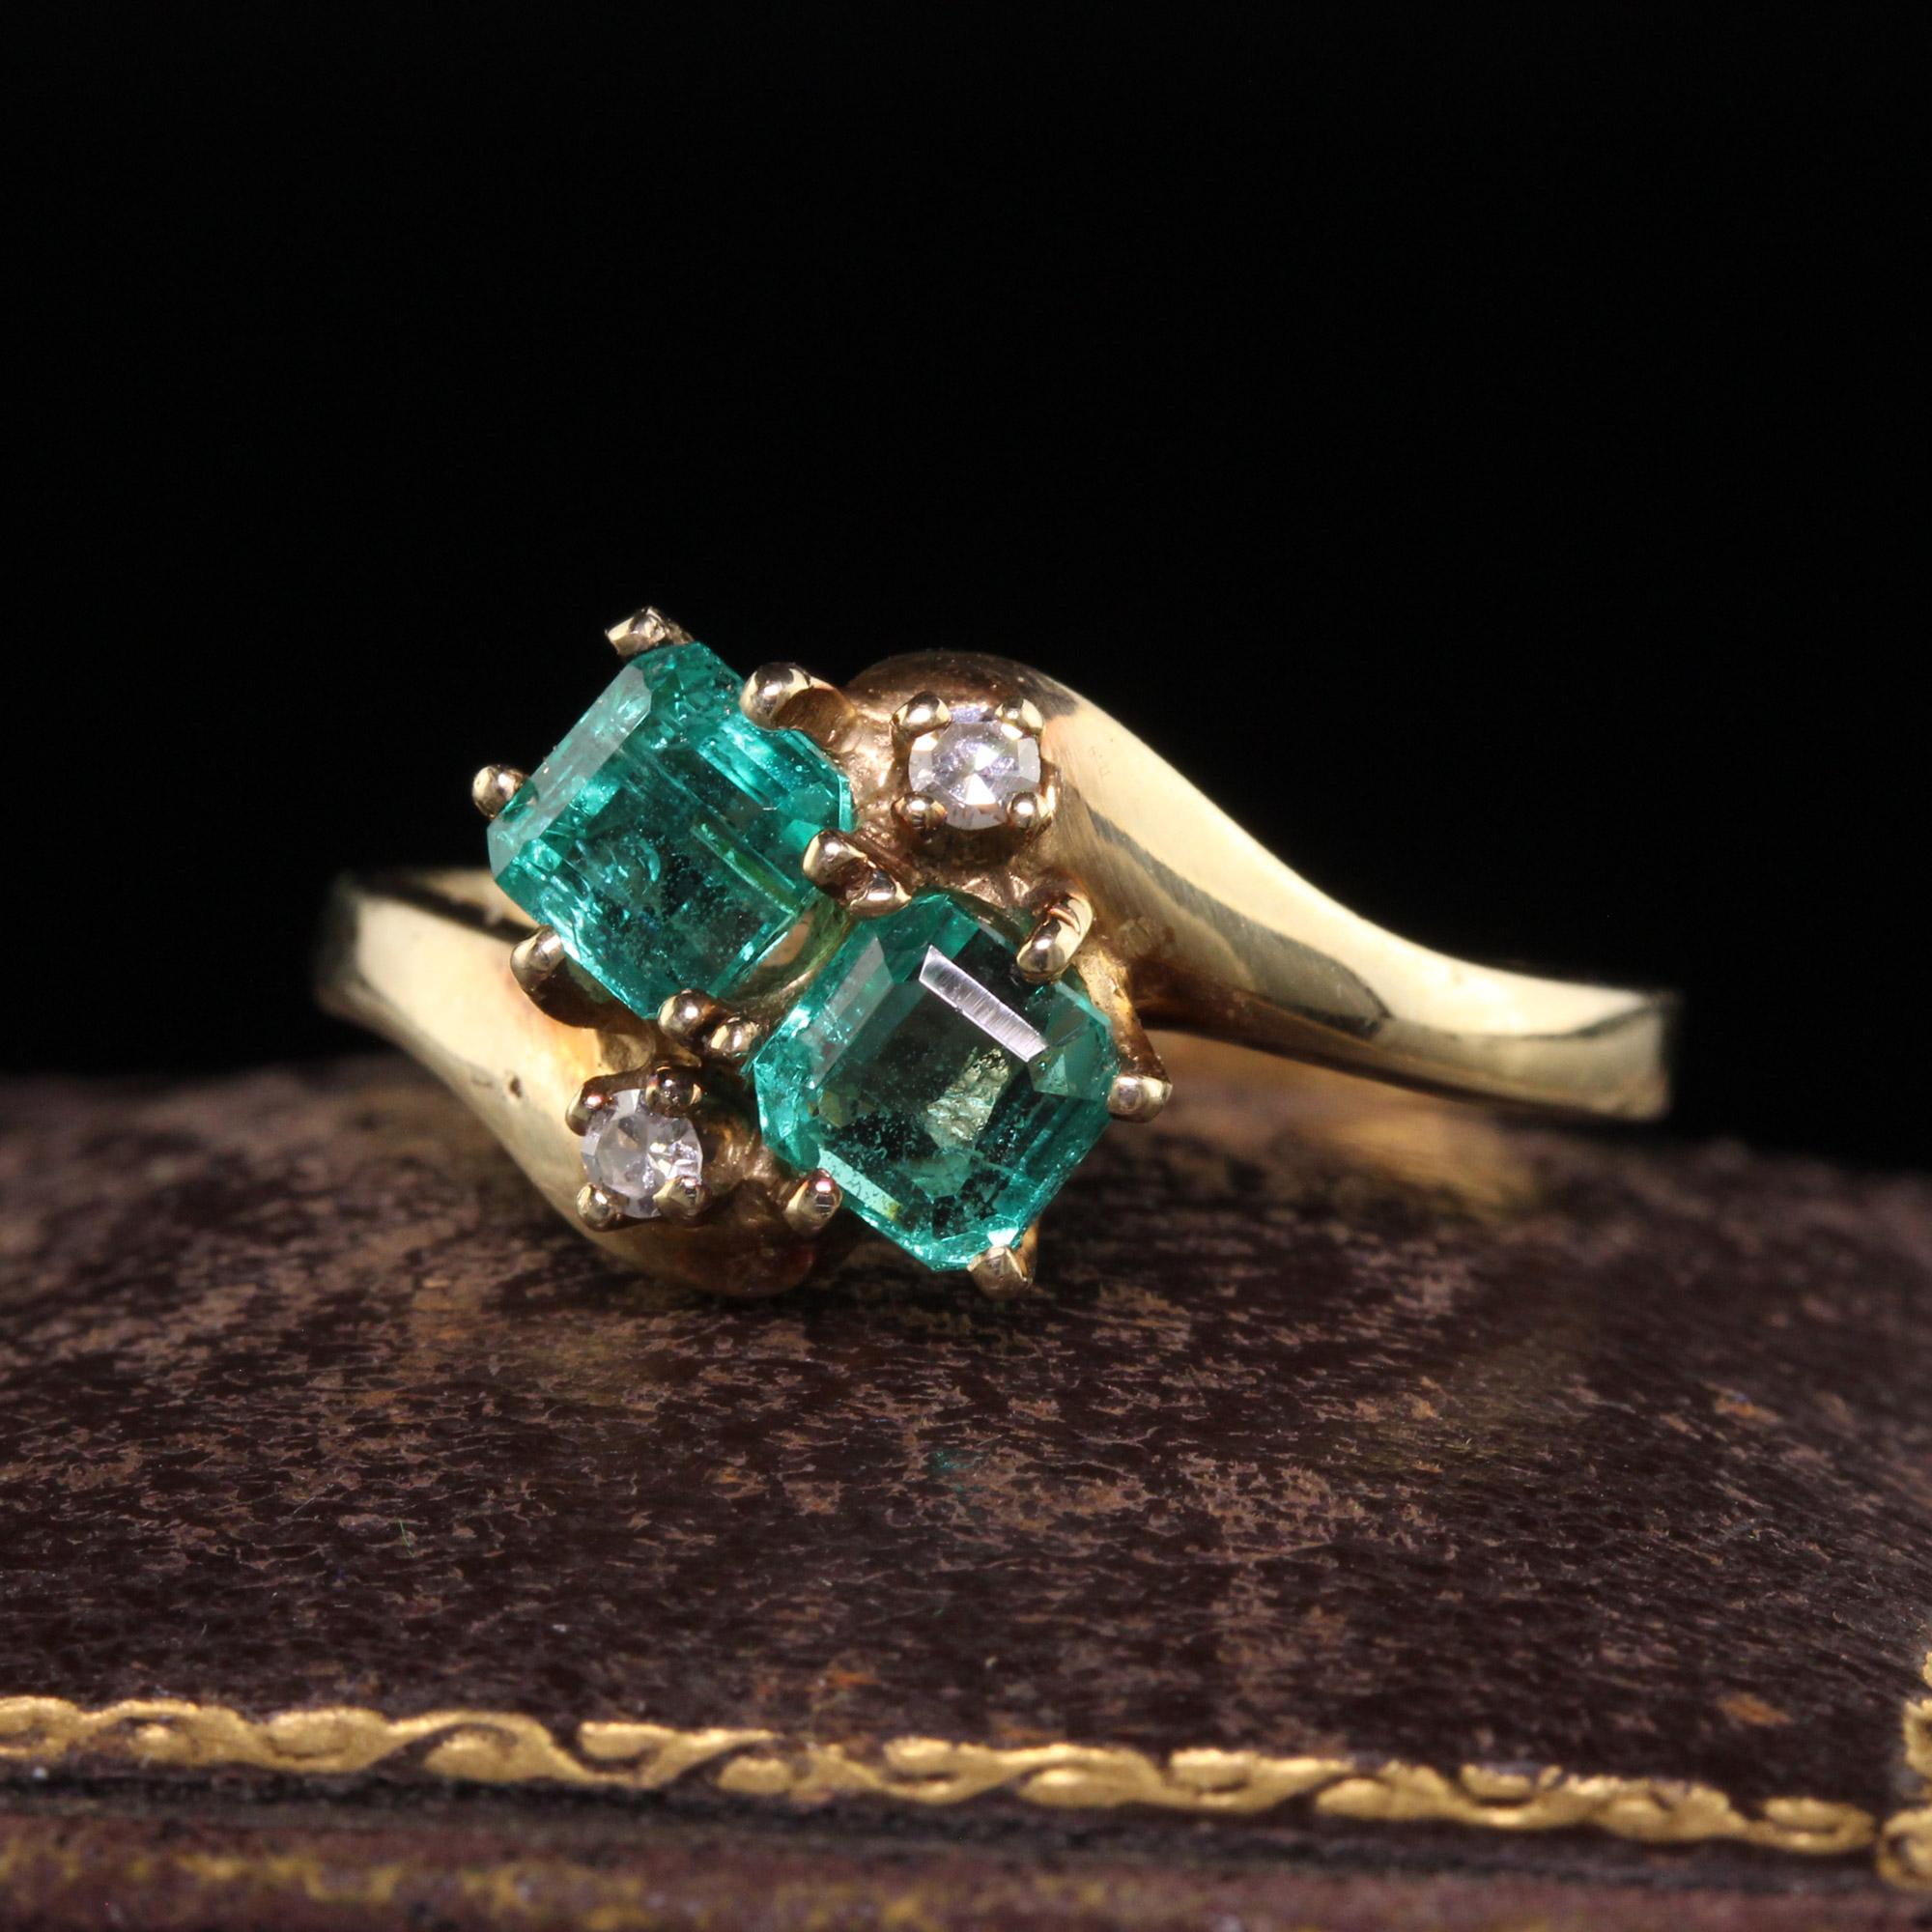 Beautiful Vintage Retro 14K Yellow Gold Colombian Emerald Toi et Moi Diamond Ring. This gorgeous ring is crafted in 14k yellow gold. The ring has two beautiful colombian emeralds on it with single cut diamonds above and below. The ring is i great